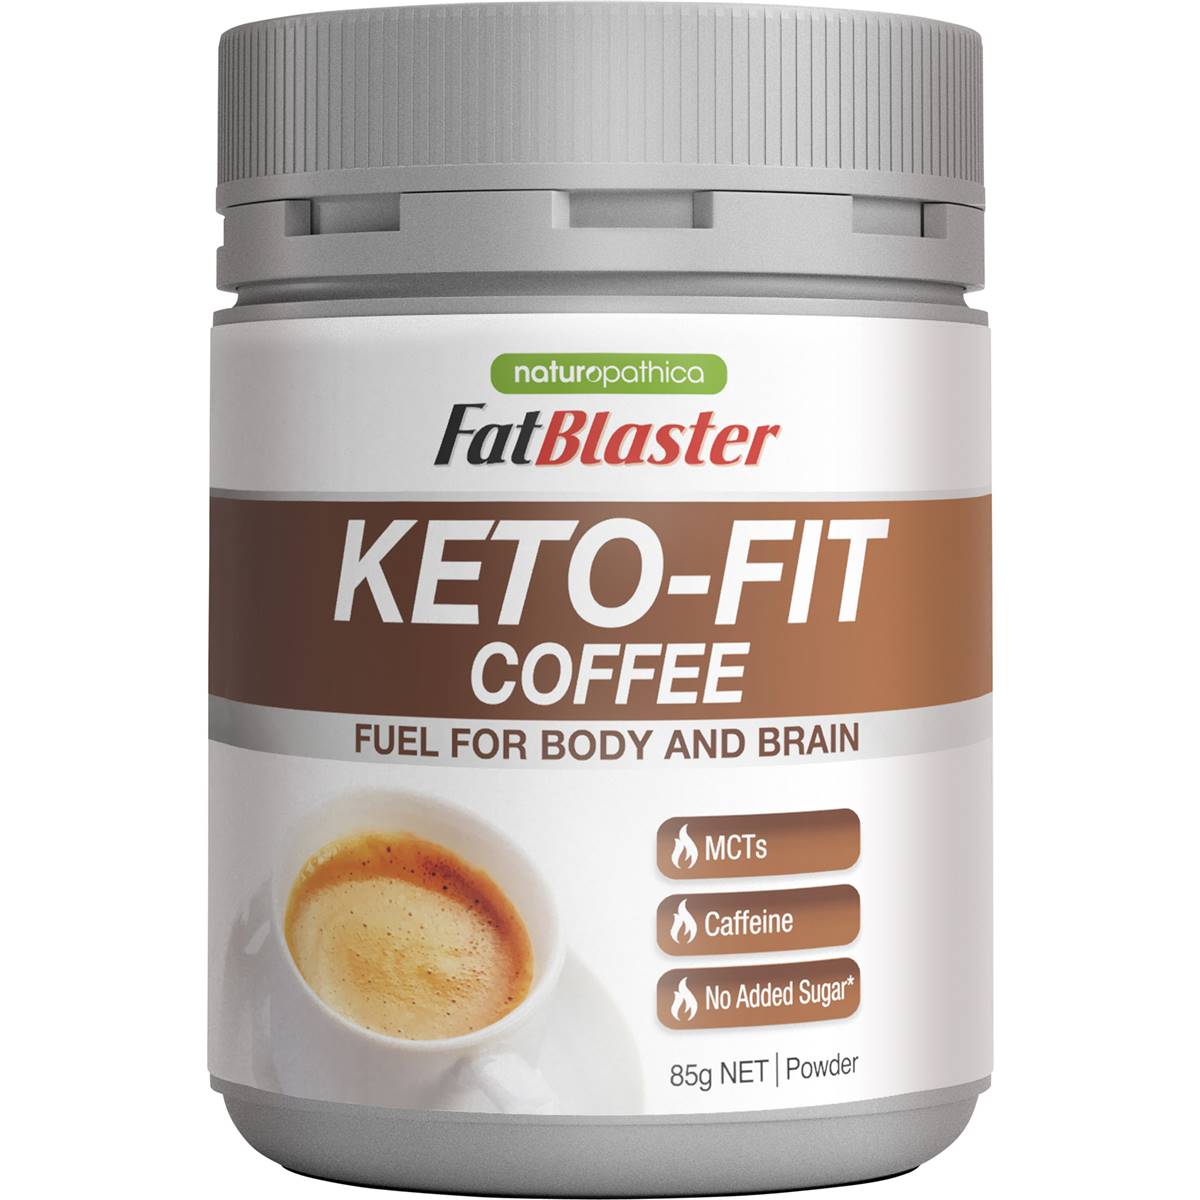 Calories in Fat Blaster Keto Fit Coffee